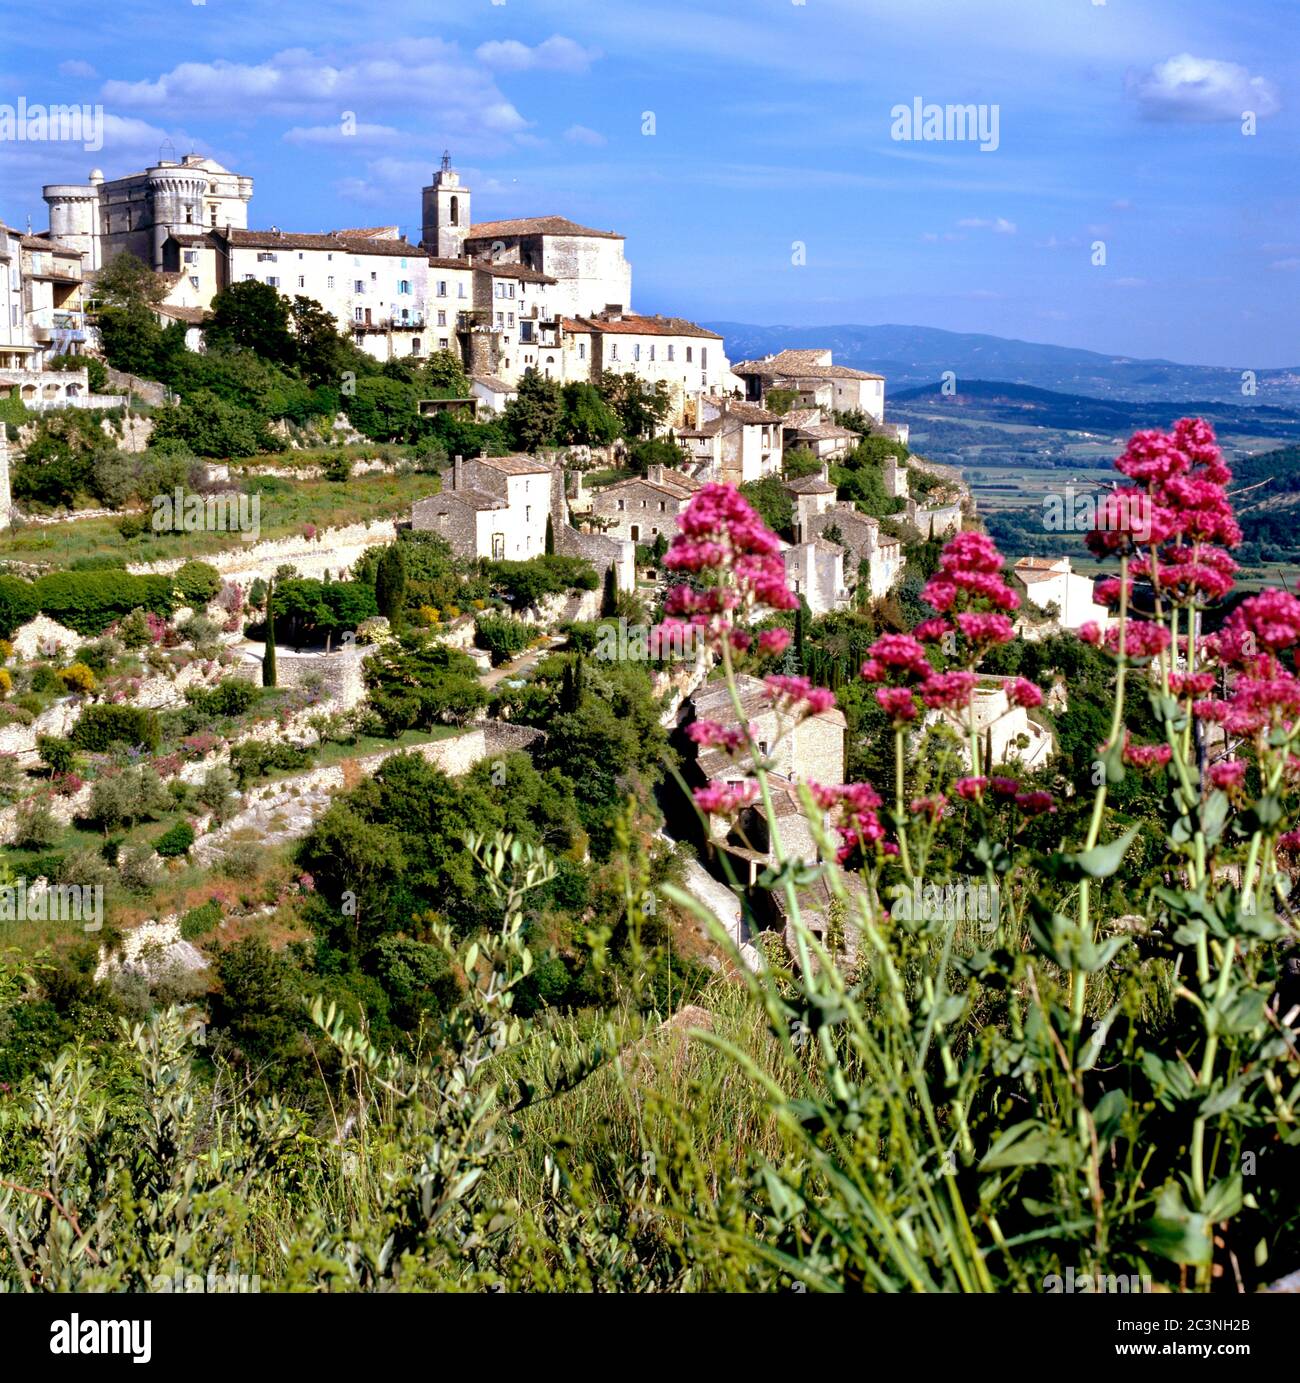 Gordes in the Les Monts de Vaucluse in the Luberon Valley of France Stock Photo